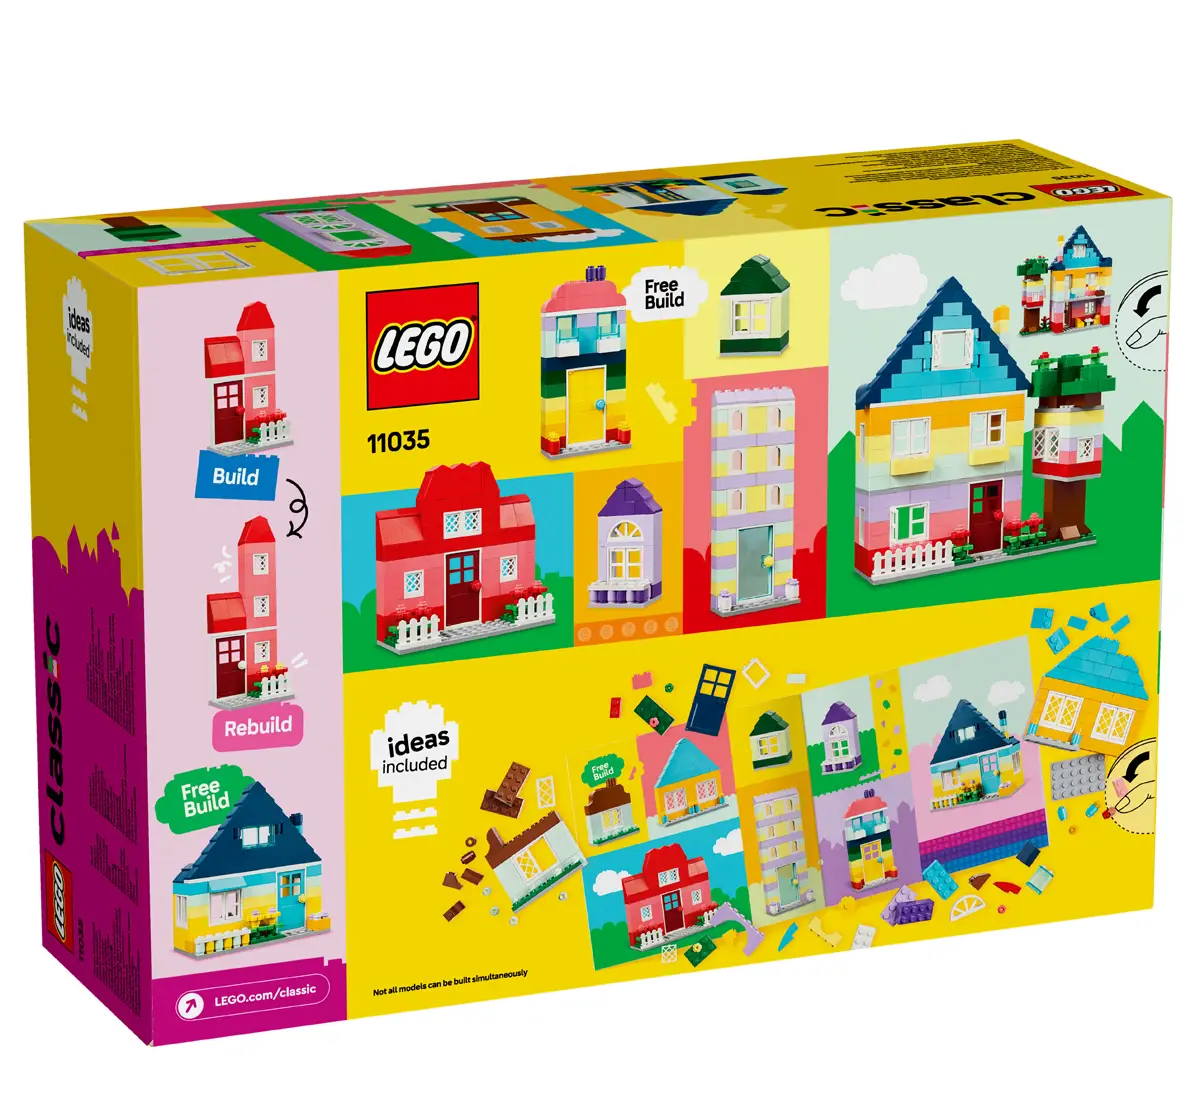 LEGO Classic Creative Houses Building Toy 11035 (1212 Pieces)